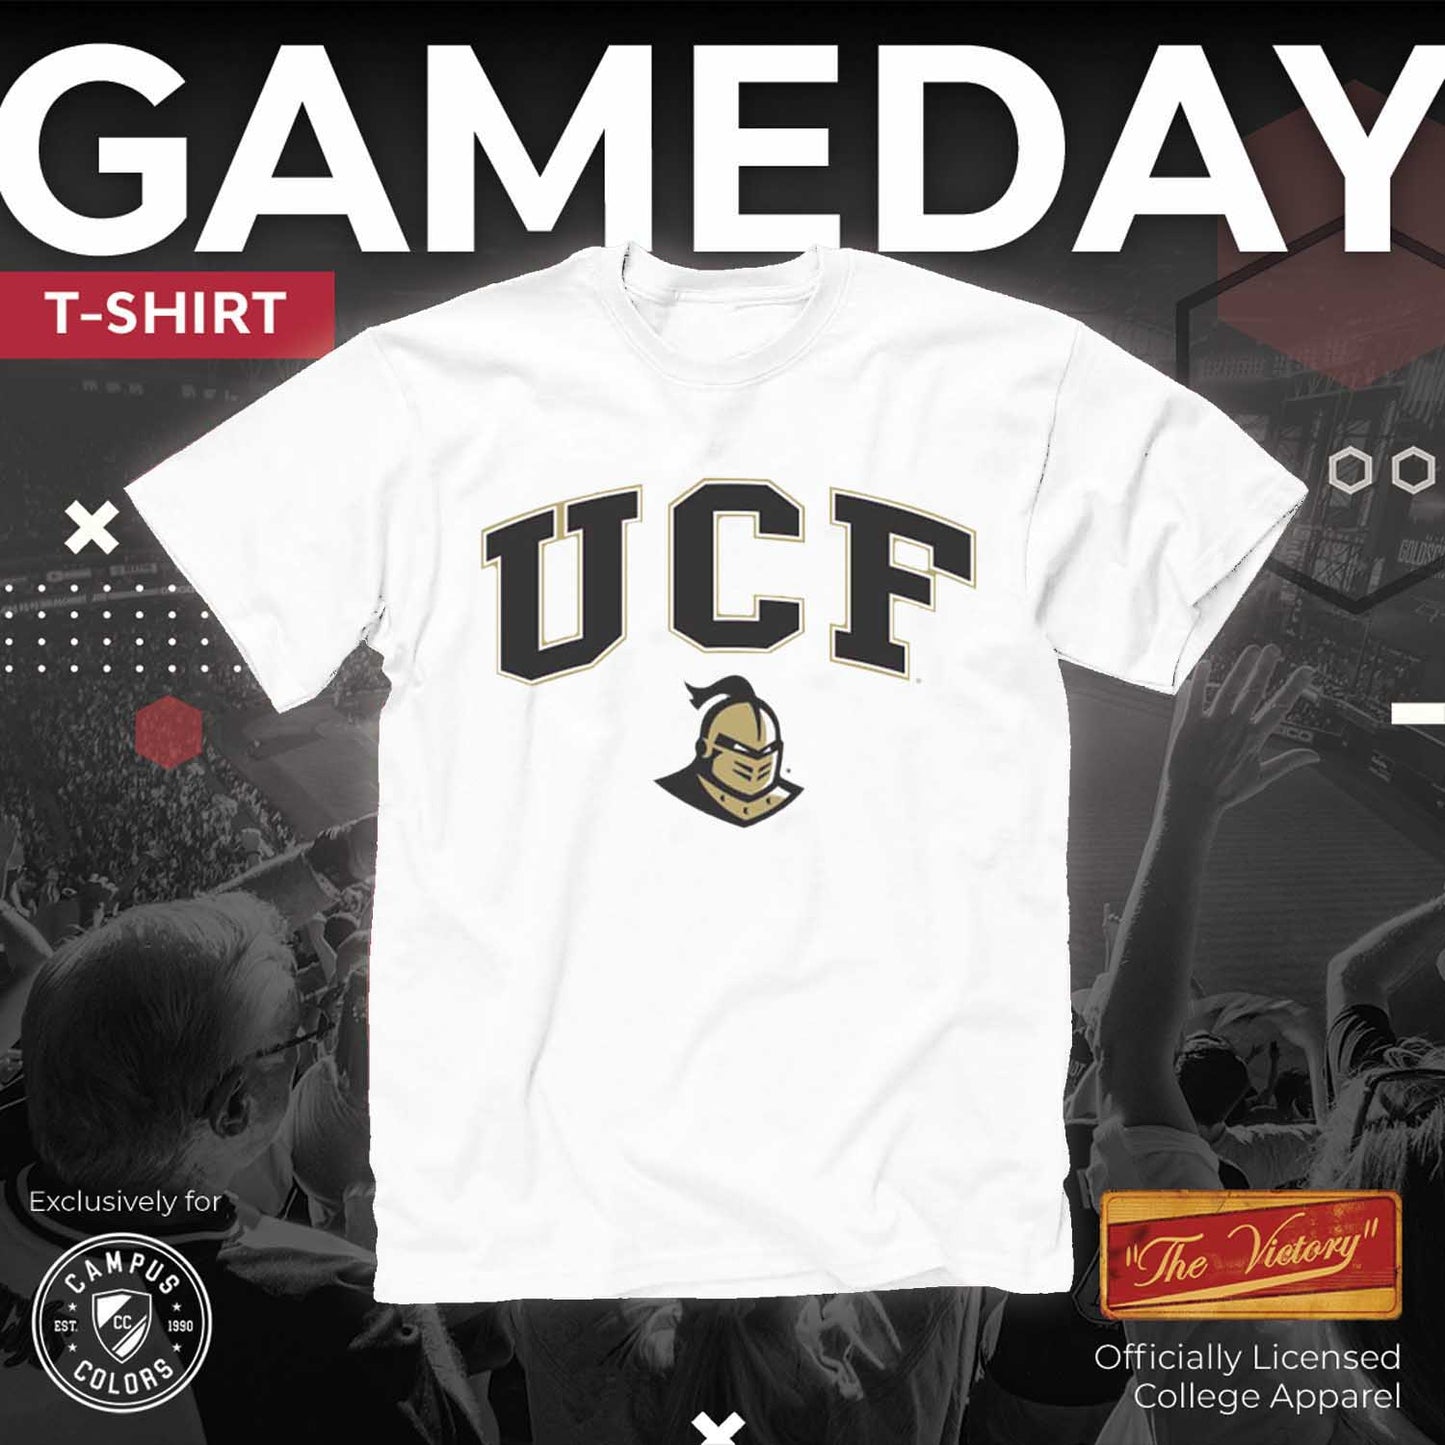 Central Florida Knights NCAA Adult Gameday Cotton T-Shirt - White